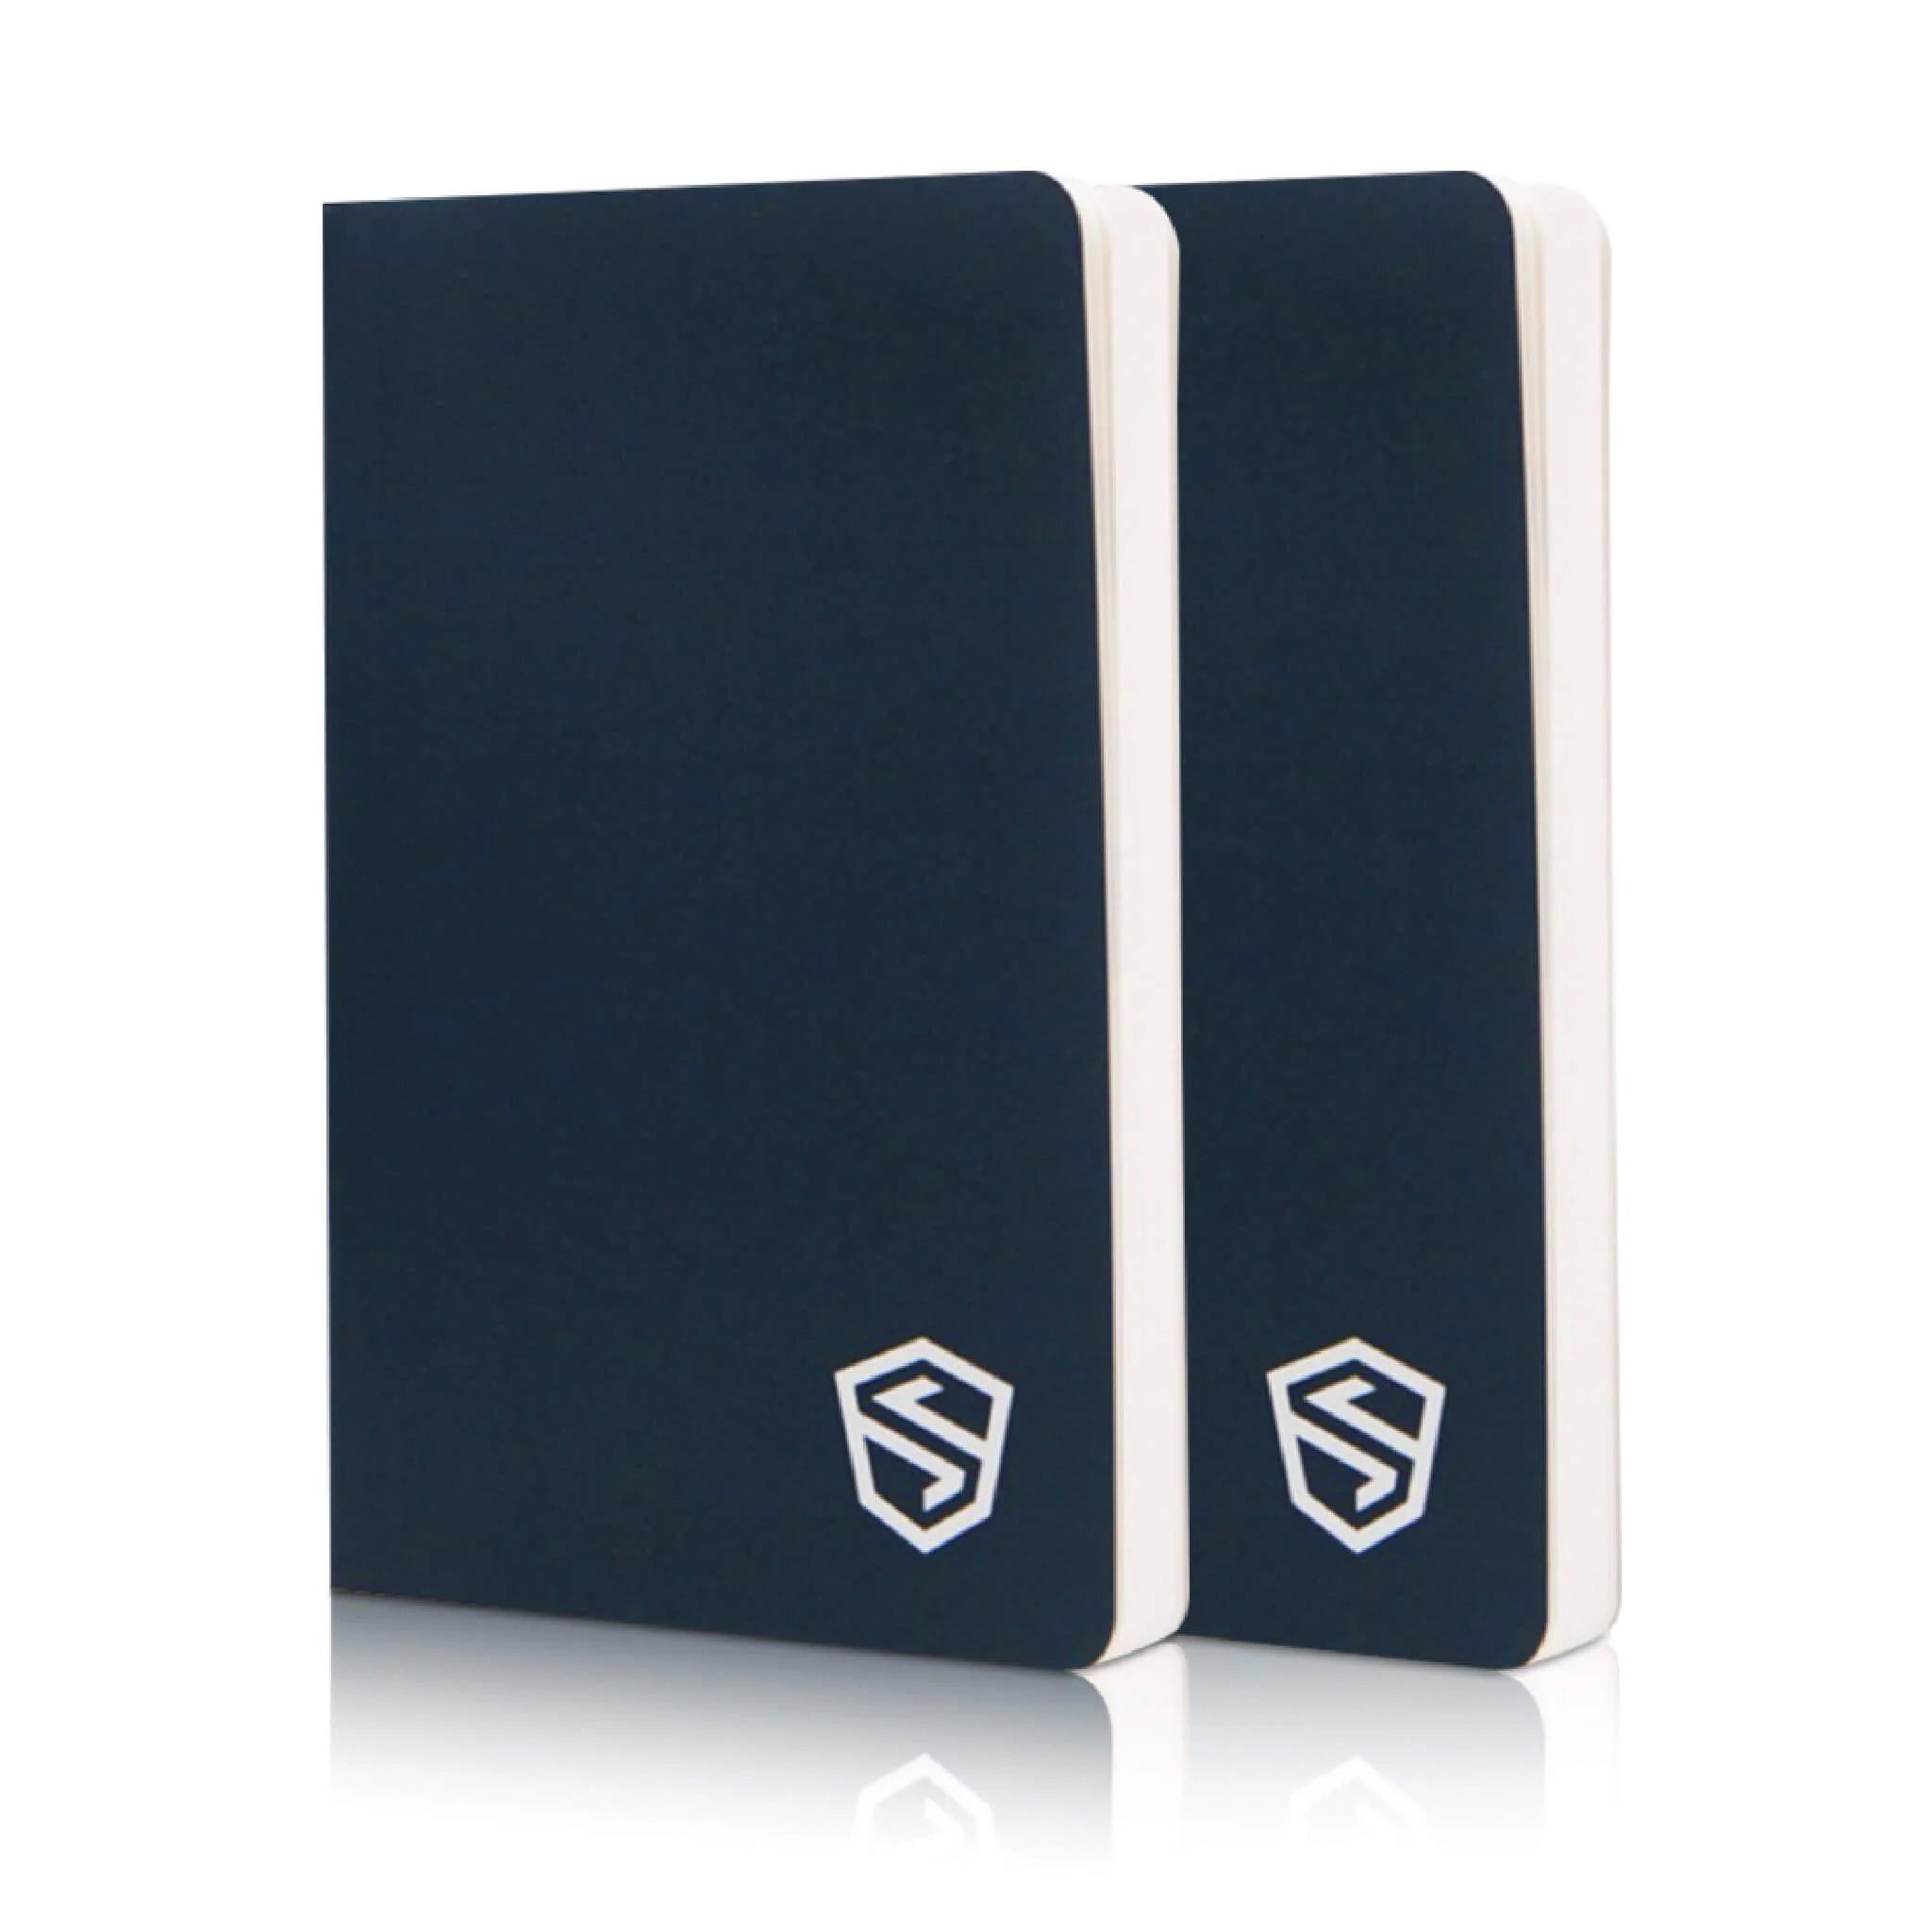 Storium Crypto Seed Phrase Storage Notebook - Waterproof Stone Paper Book -  Keep Your Cryptocurrency Recovery Phrase Password Safe & Secure - Cold